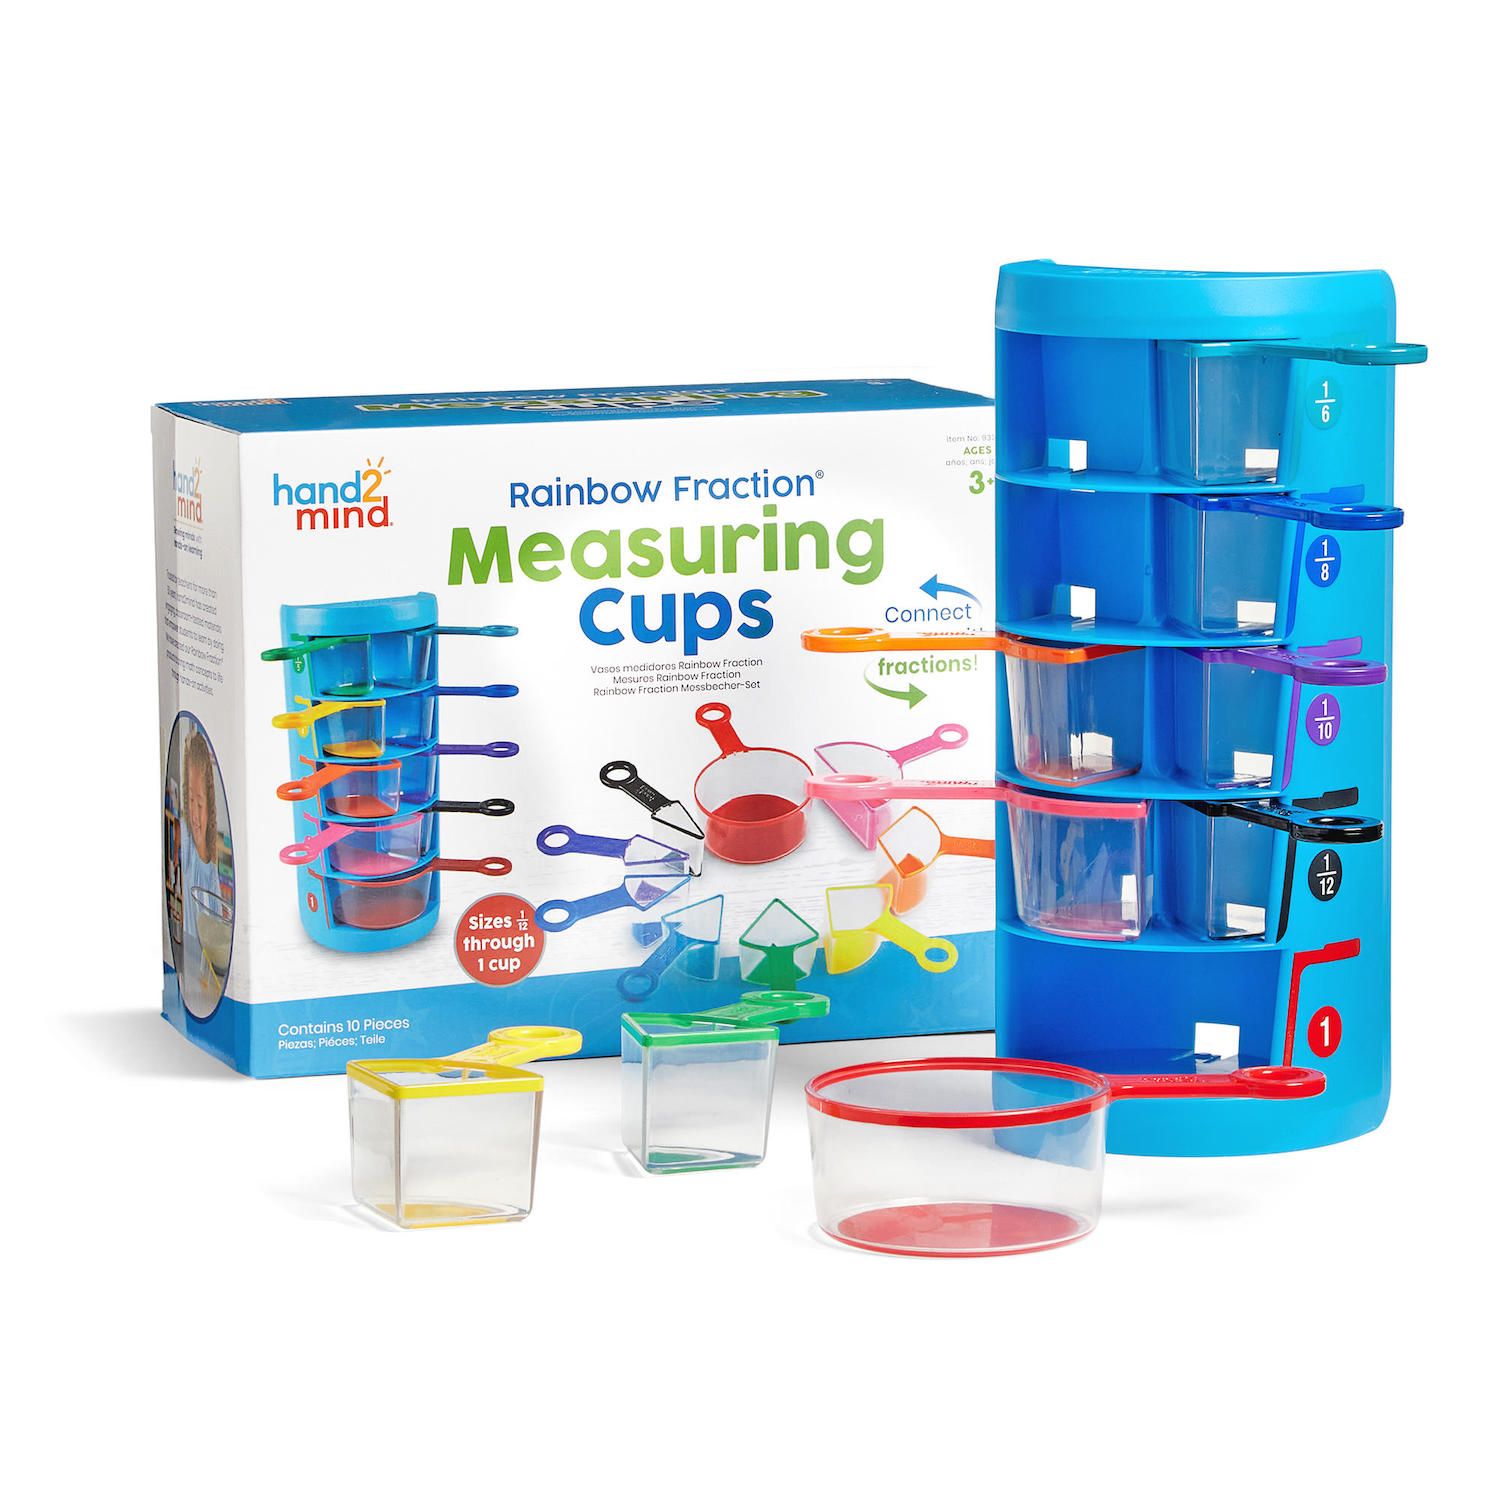 4 Cup Measuring Cup - Ounce, fractional cup & ml markings